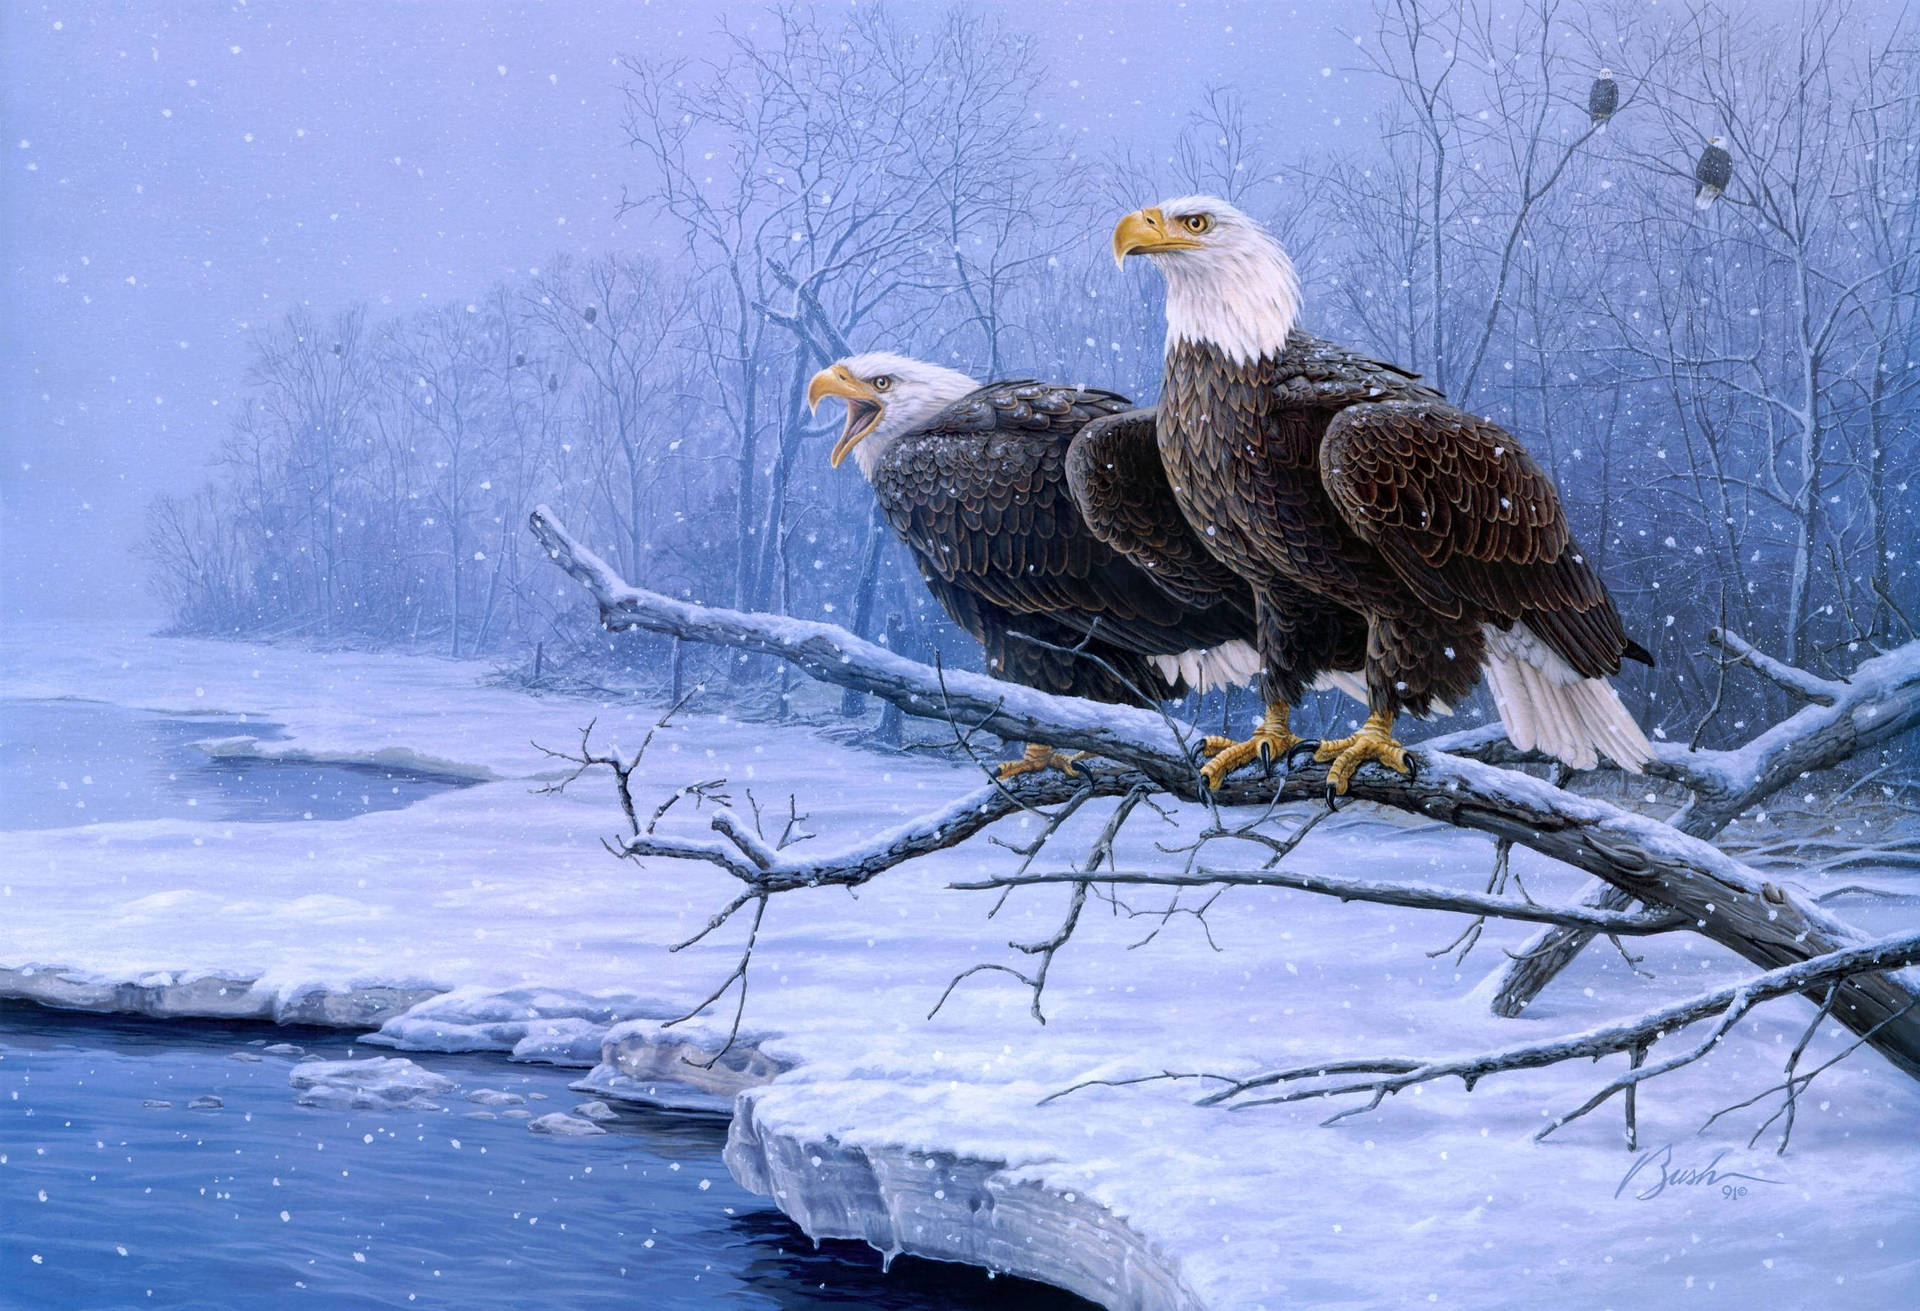 A Majestic Bald Eagle Perched by the Snowy River Wallpaper